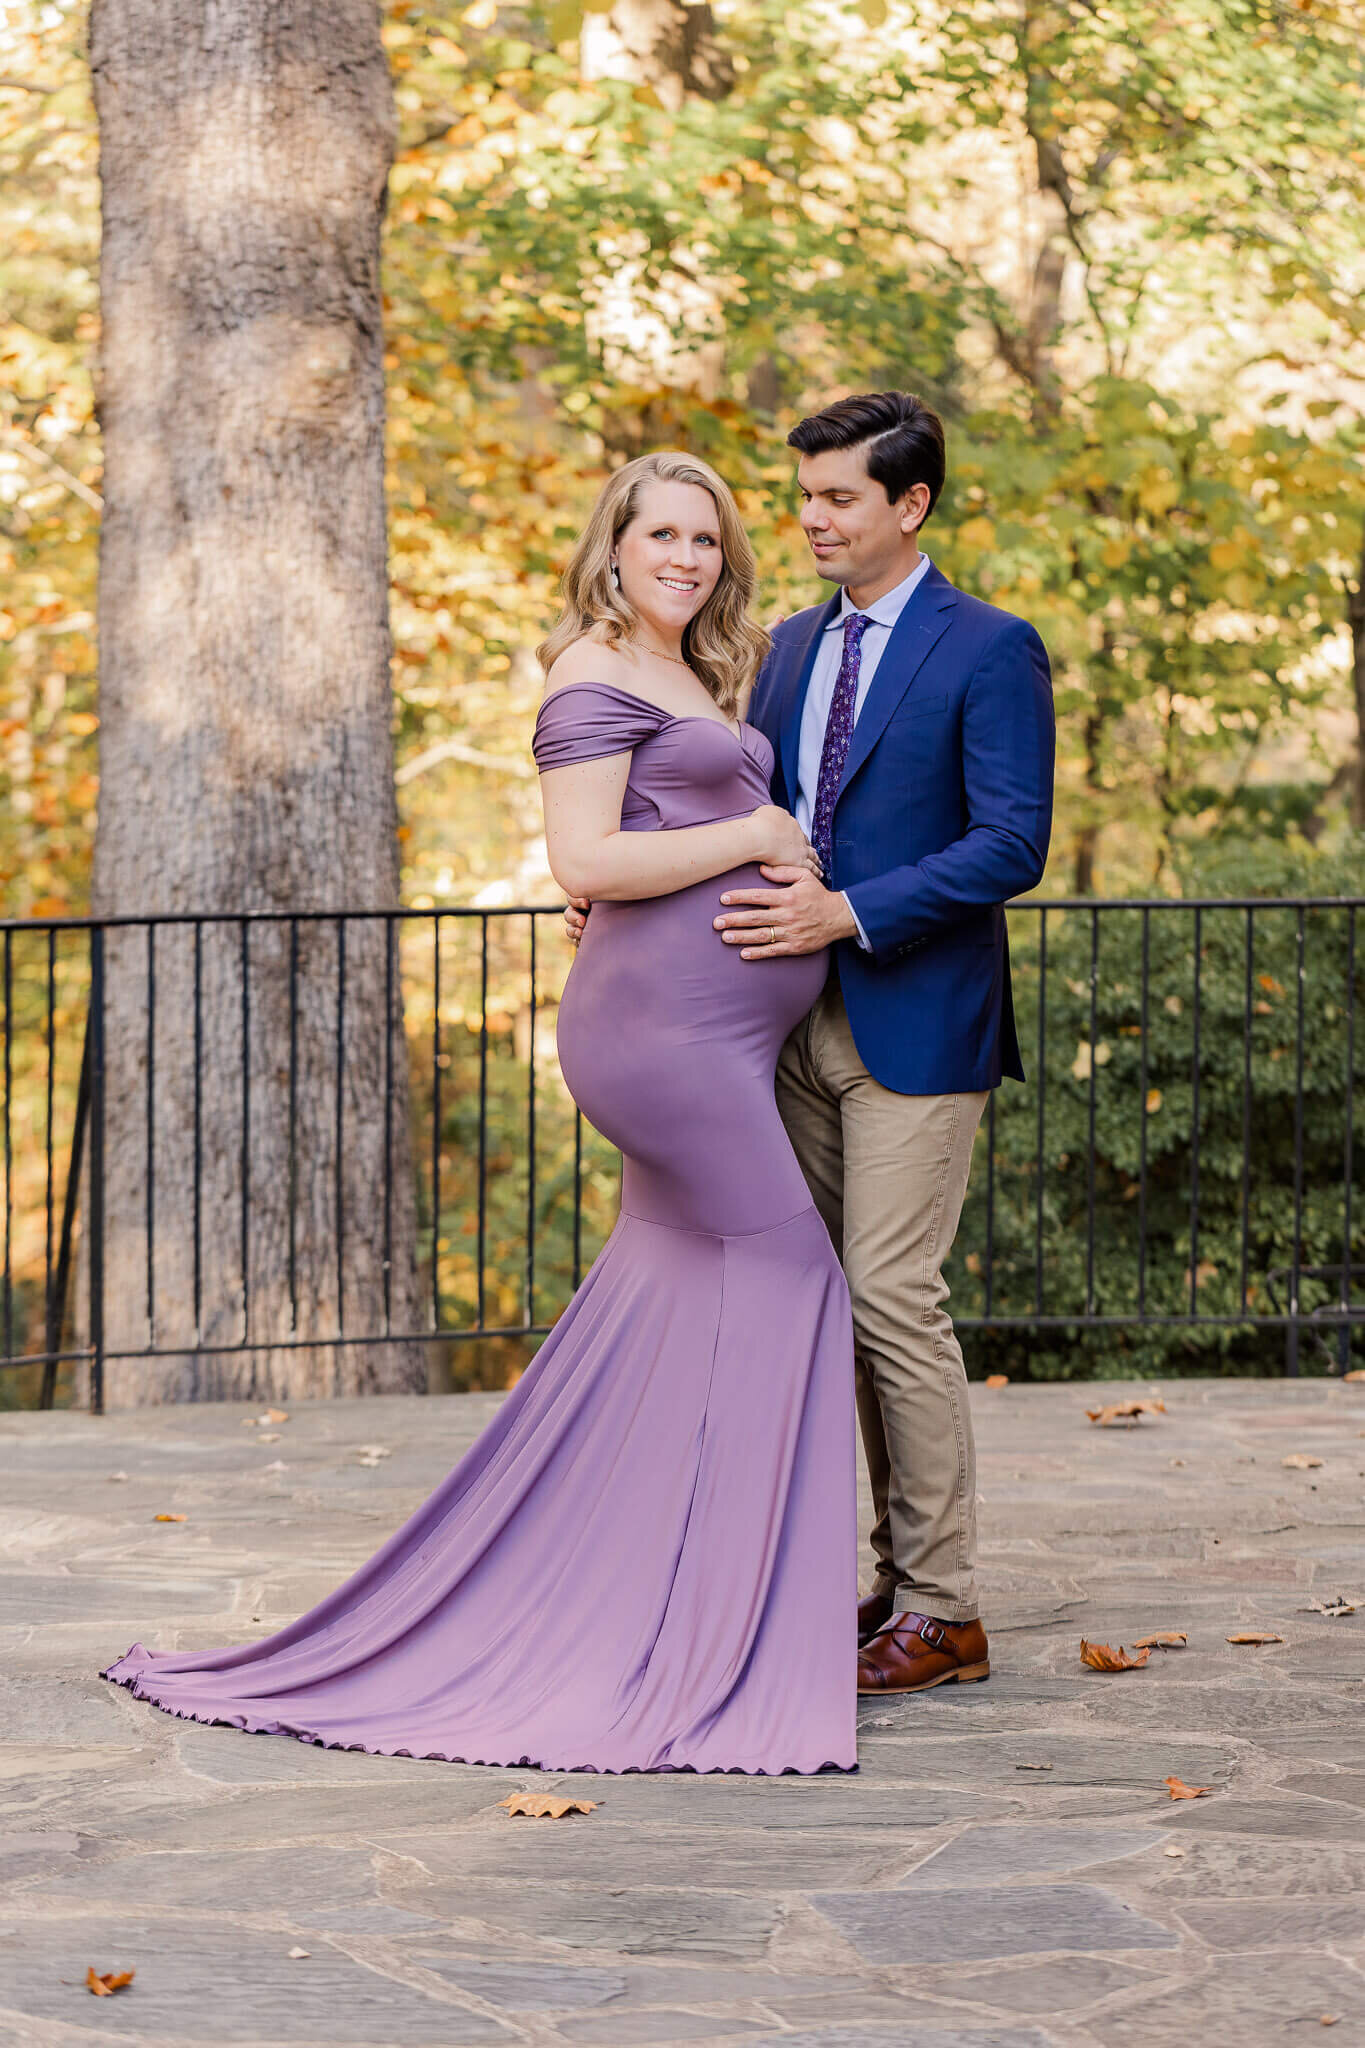 A couple posing at a park in Centreville, VA for their maternity photography session.